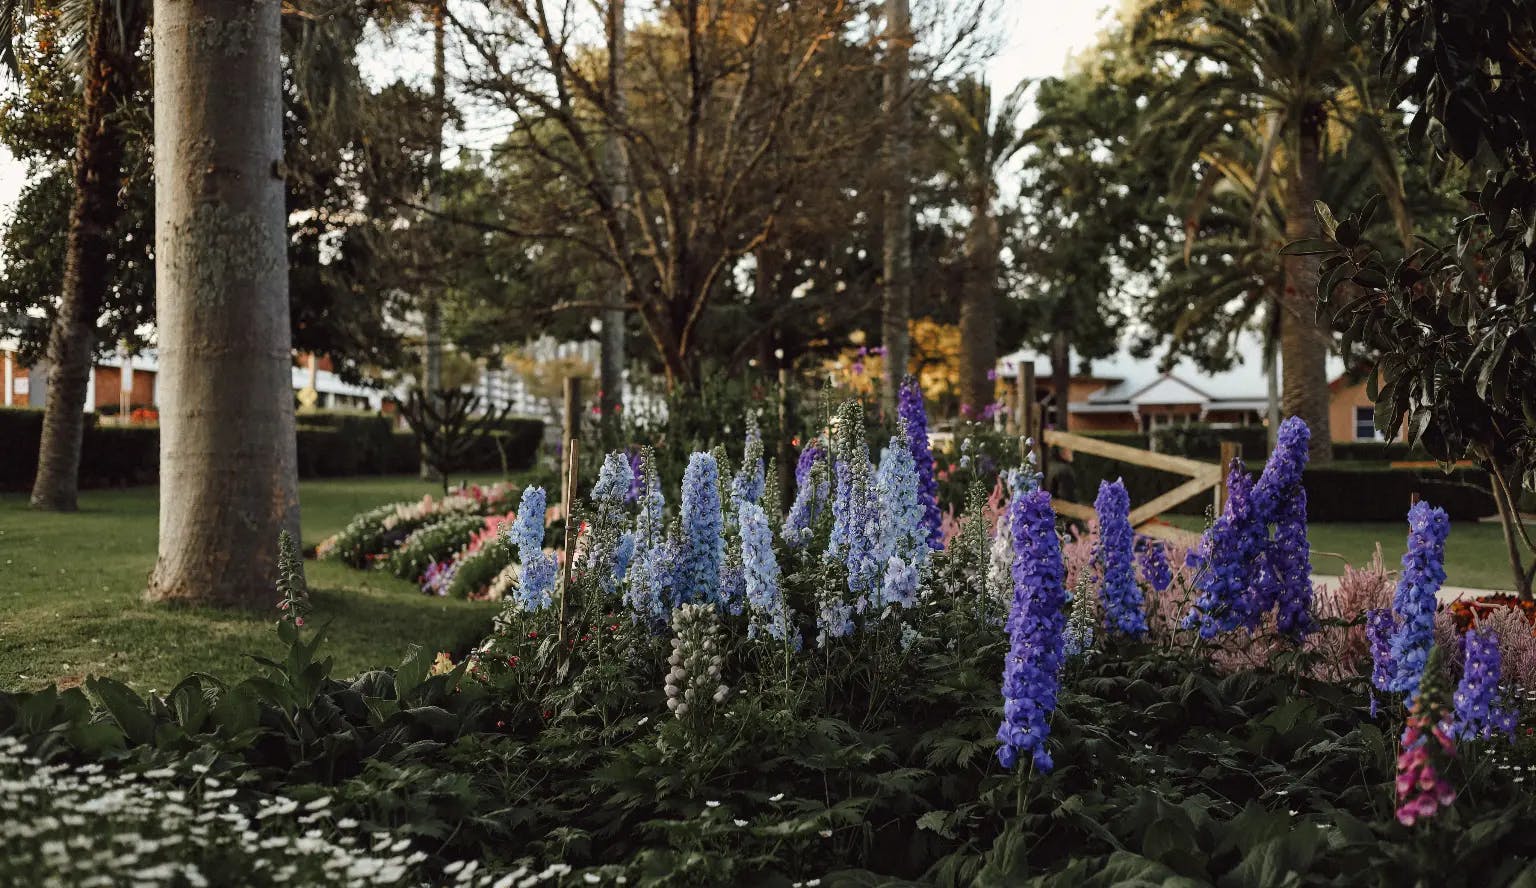 A garden with vibrant purple and blue delphiniums in the foreground, surrounded by lush green foliage. A path cuts through the garden, and in the background, trees and bushes fill the landscape. The scene is serene and well-maintained.